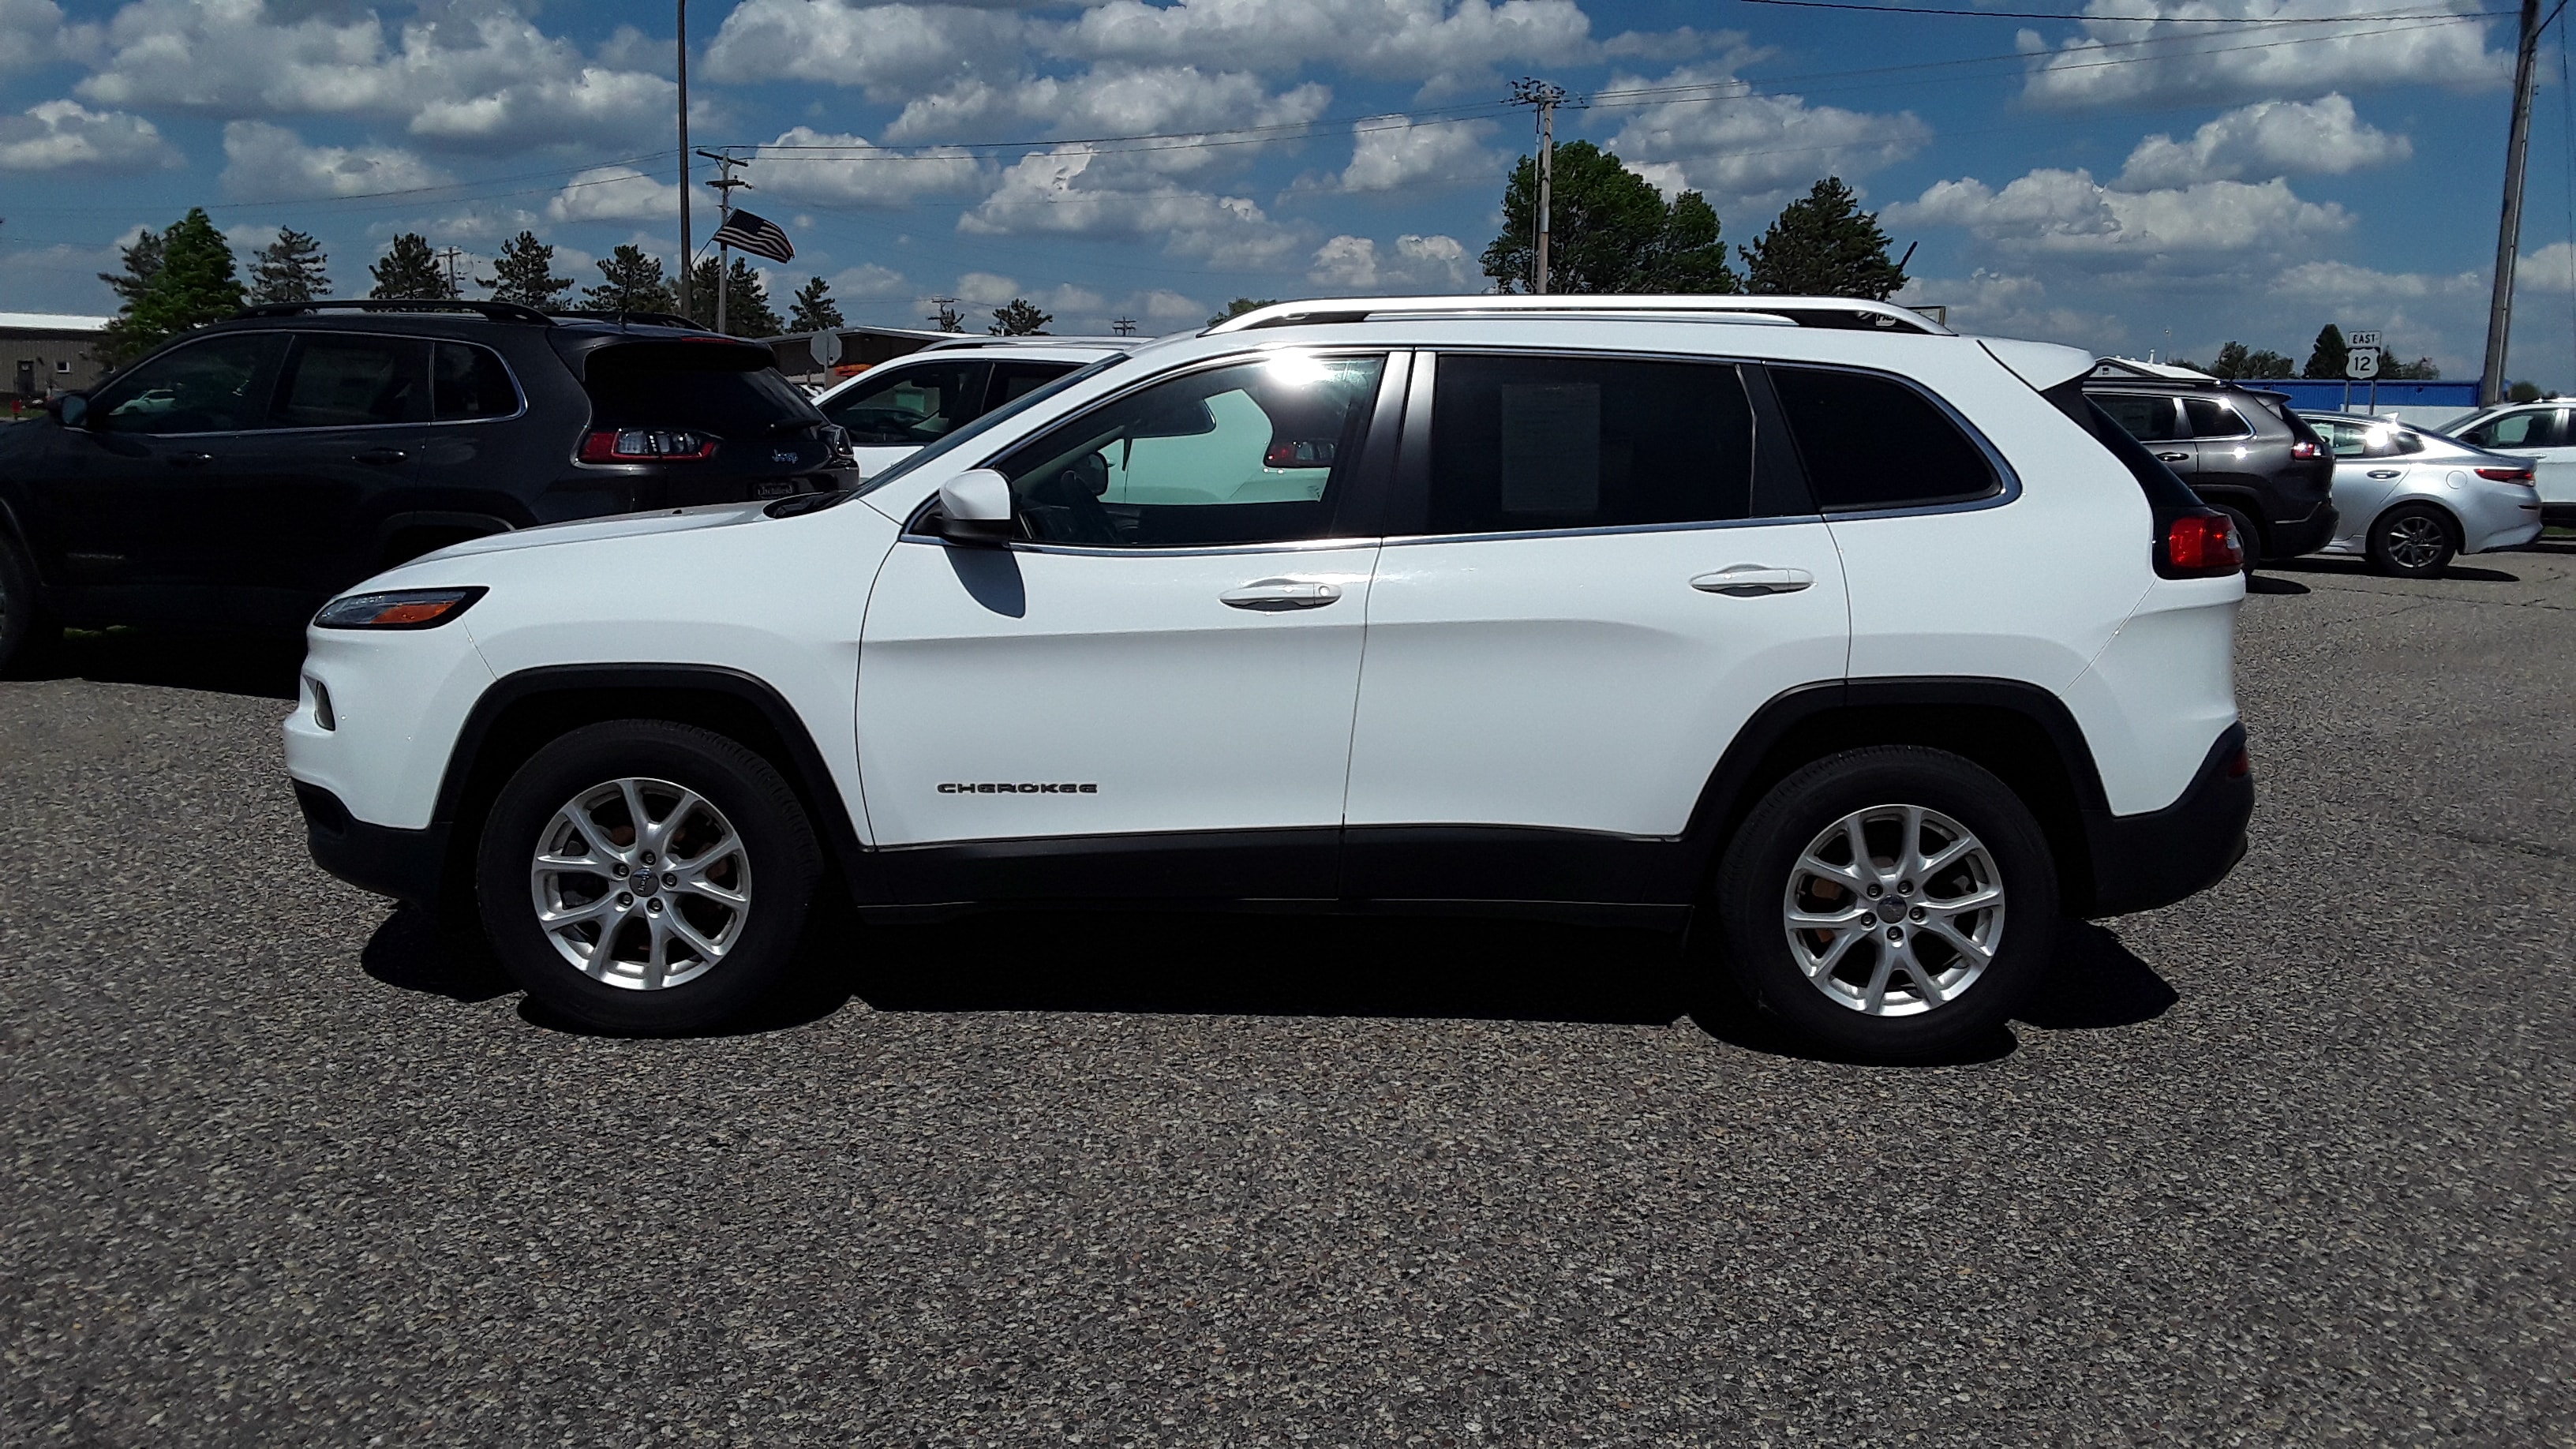 Used 2015 Jeep Cherokee Latitude with VIN 1C4PJMCS8FW725139 for sale in Litchfield, Minnesota